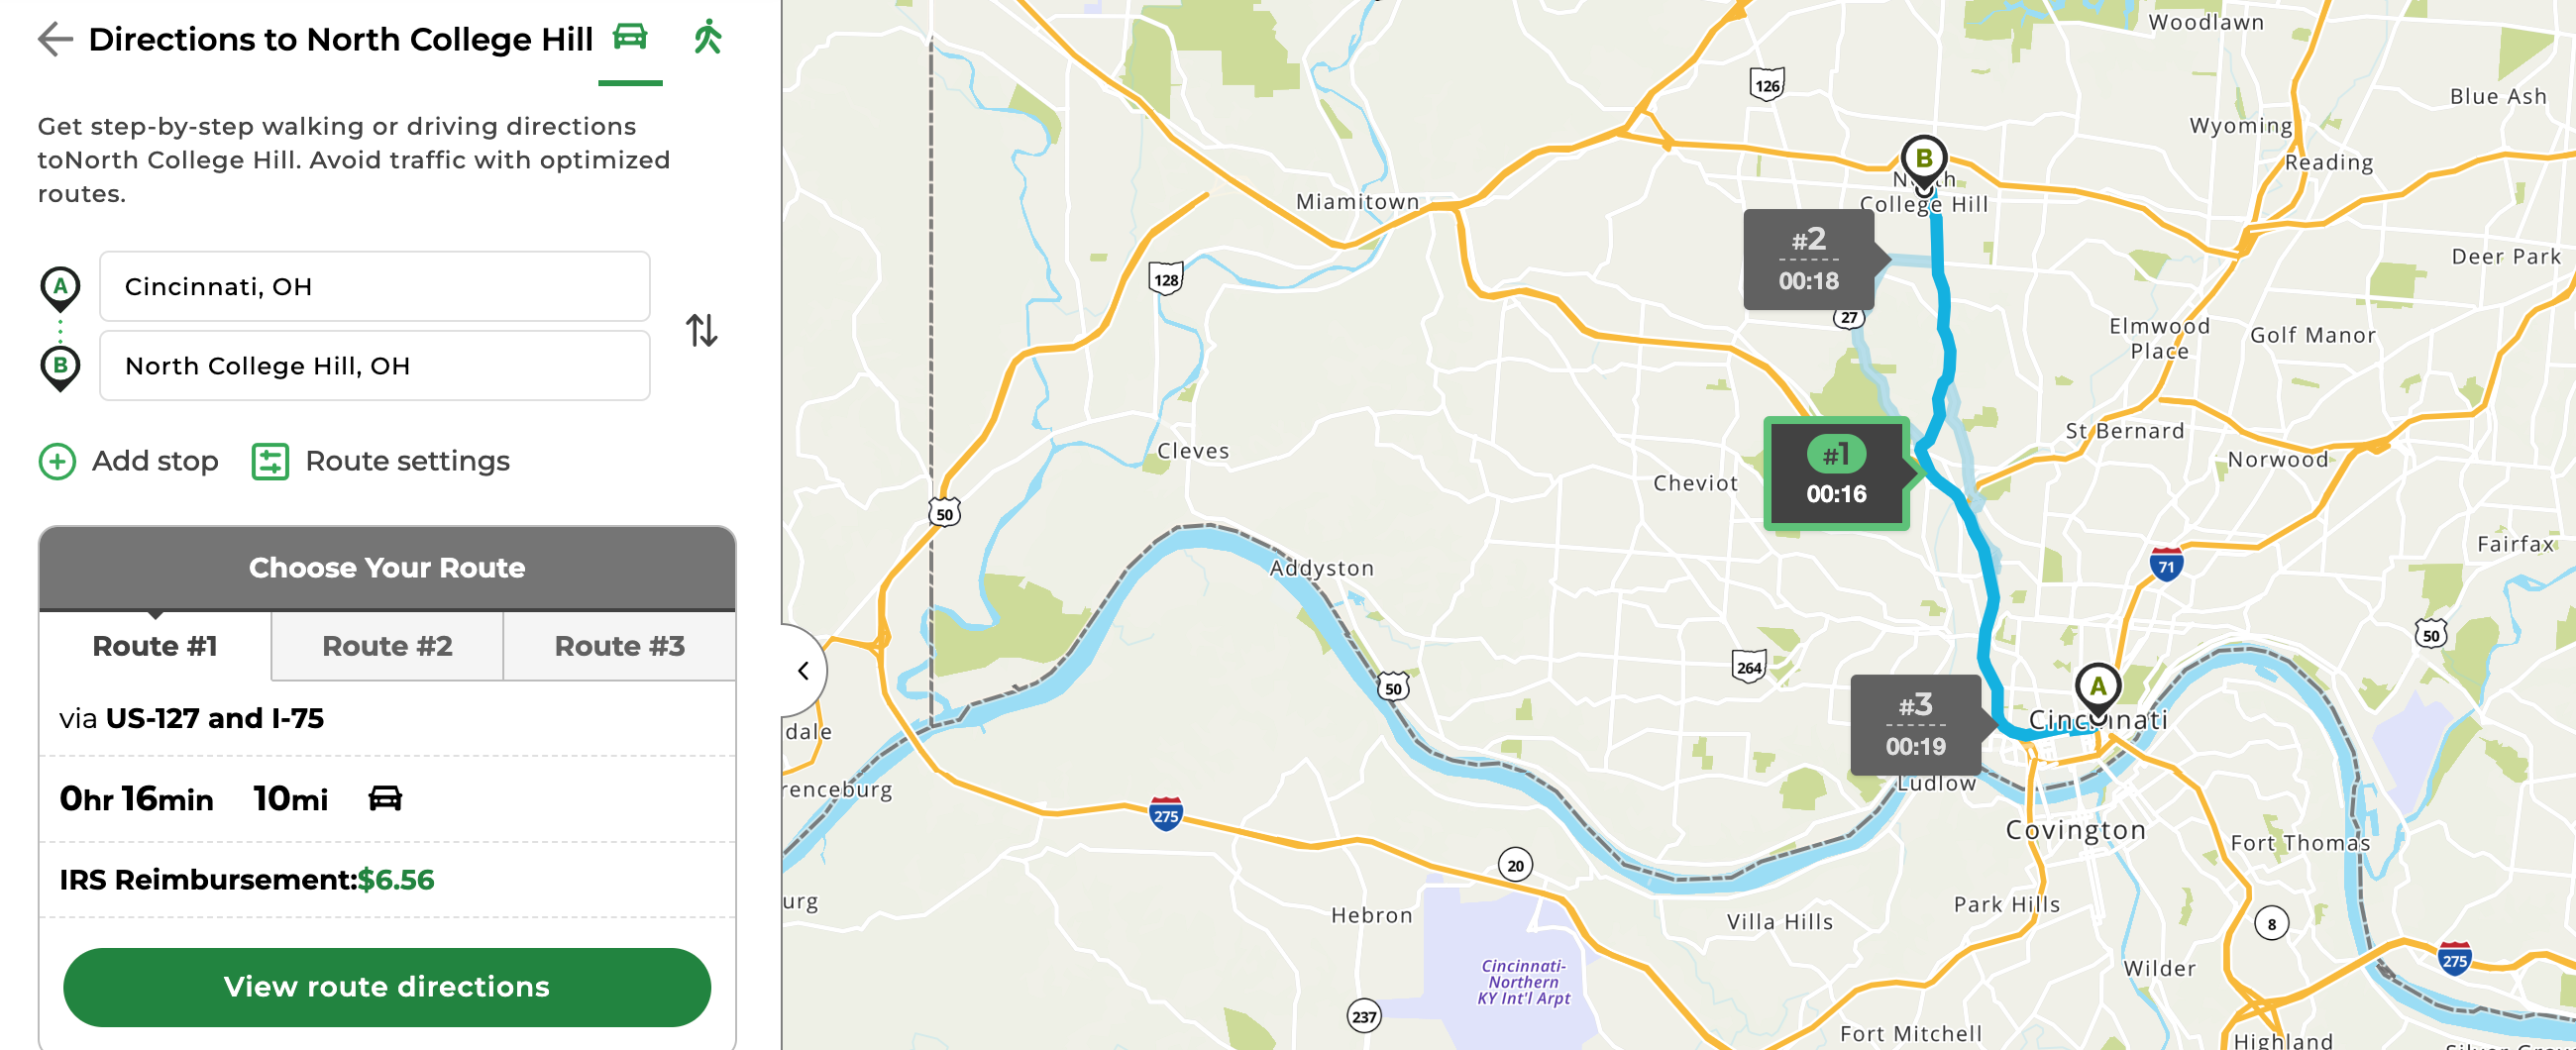 How to find Cincinnati on MapQuest?